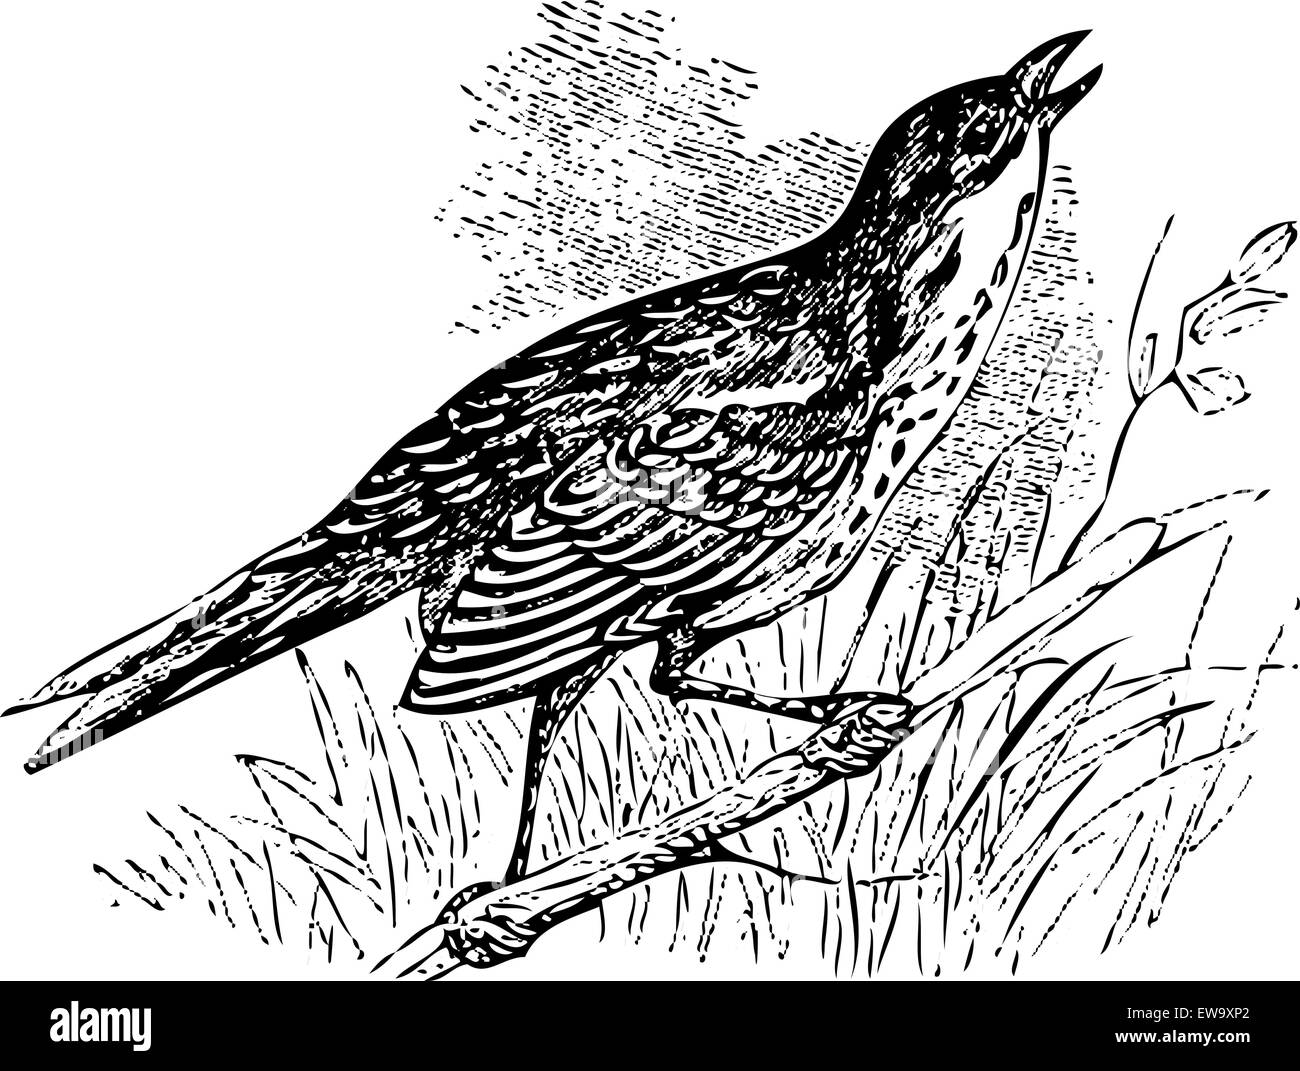 Old engraved illustration of a Saltmarsh sharp-tailed sparrow or Ammodramus caudacutus, singing while perched on a branch. Live traced. Stock Vector